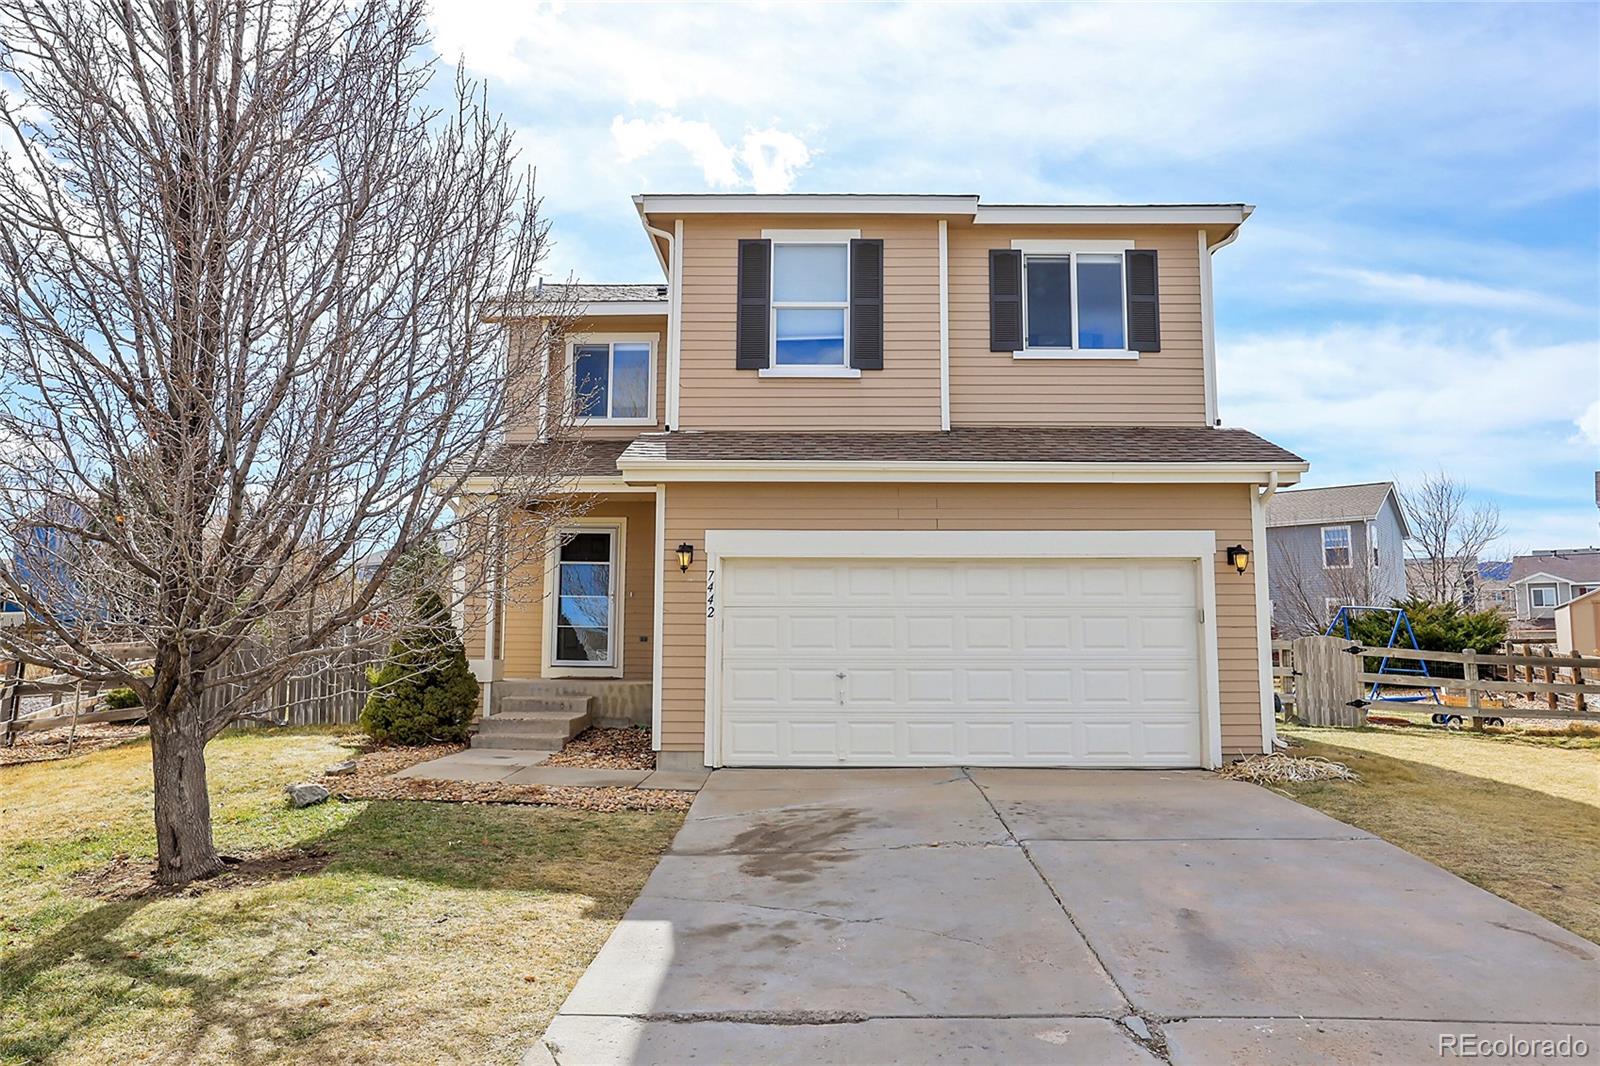 7442  buffalo court, Littleton sold home. Closed on 2024-05-14 for $600,000.